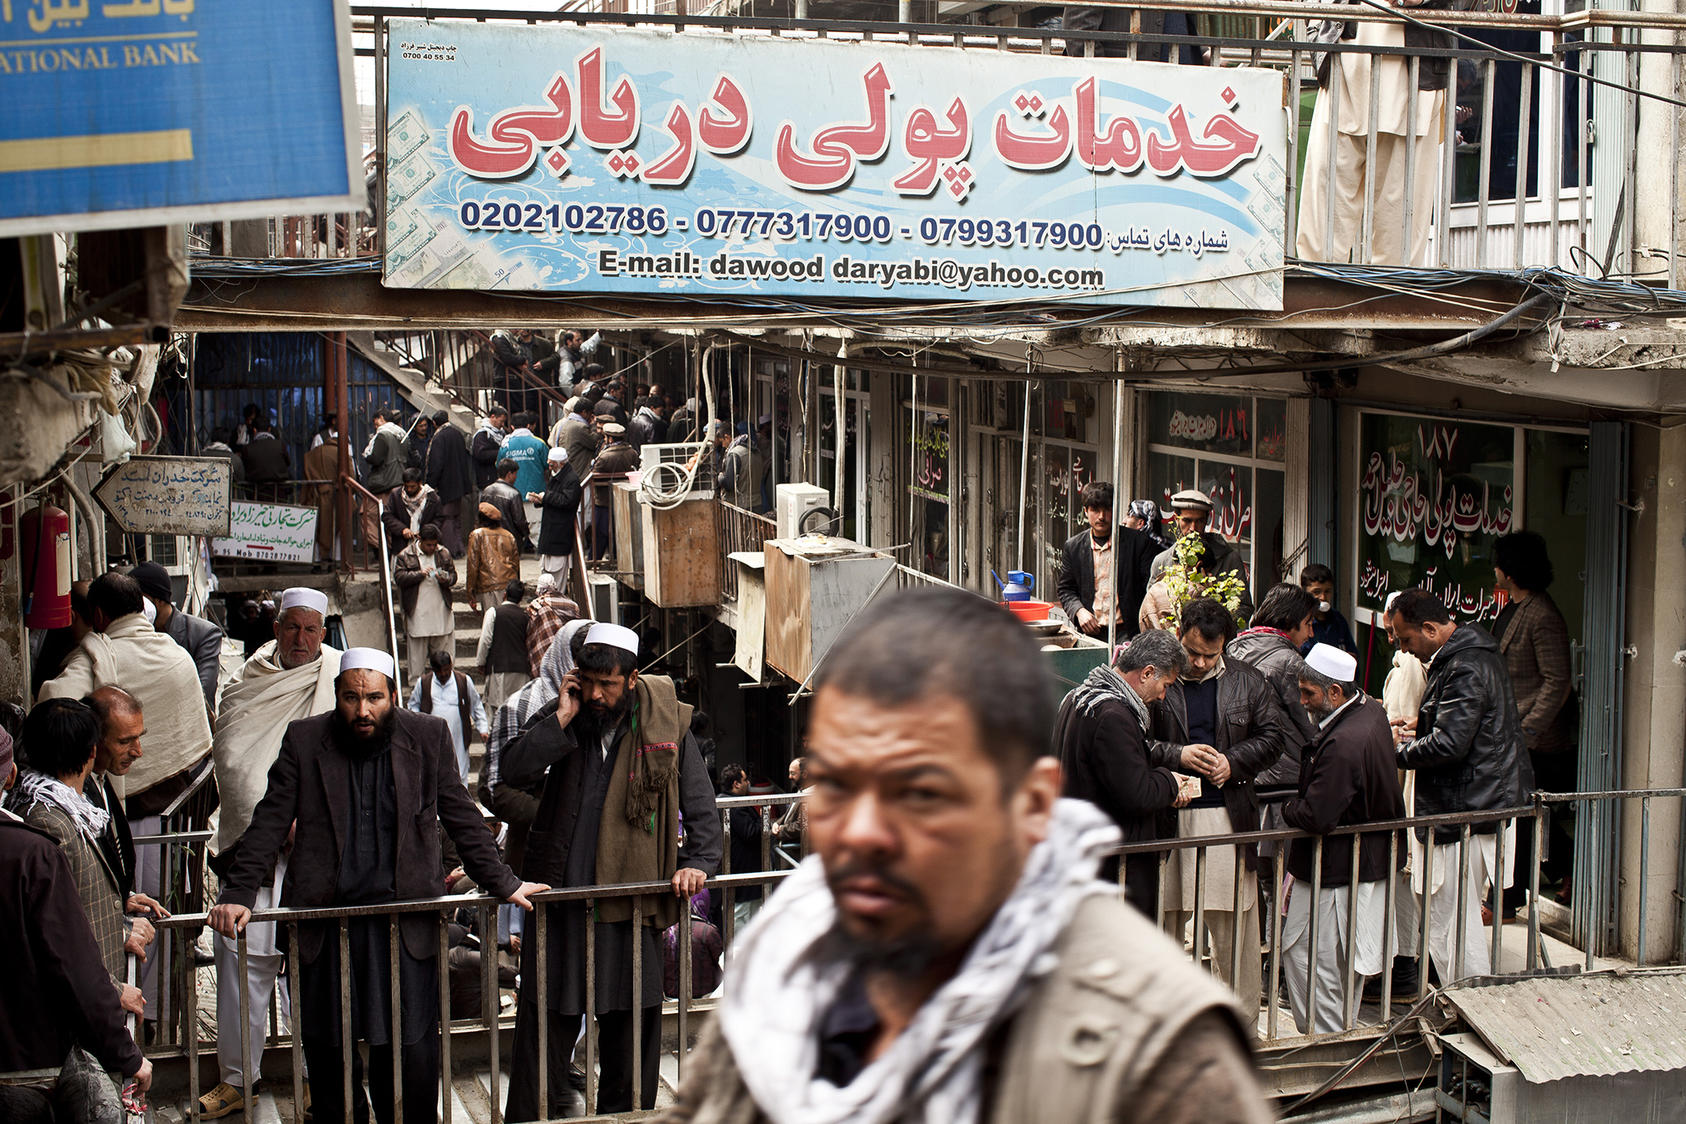 The Money and Exchange Market in Kabul, Afghanistan, March 17, 2012. (Bryan Denton/The New York Times)